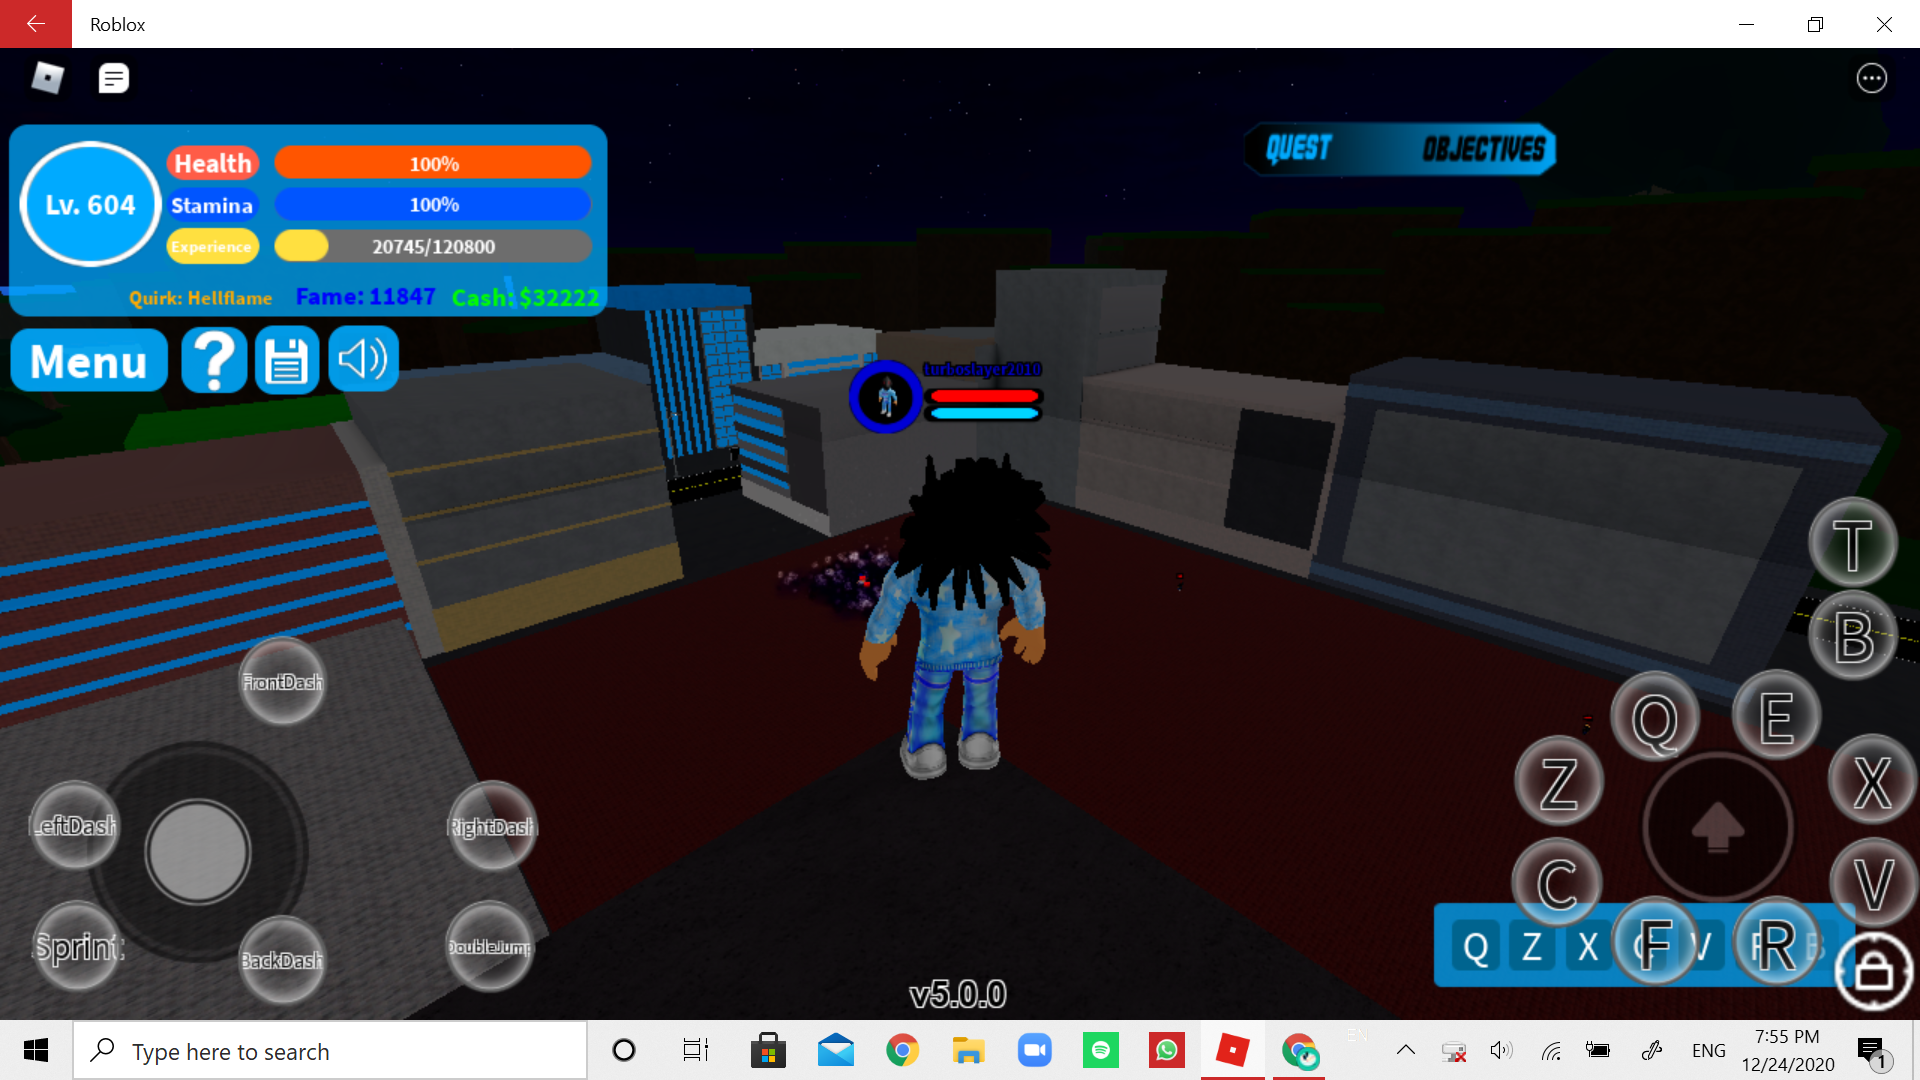 Is My Account The Only One Missing The Pvp Button Fandom - boku no roblox rematered pvp